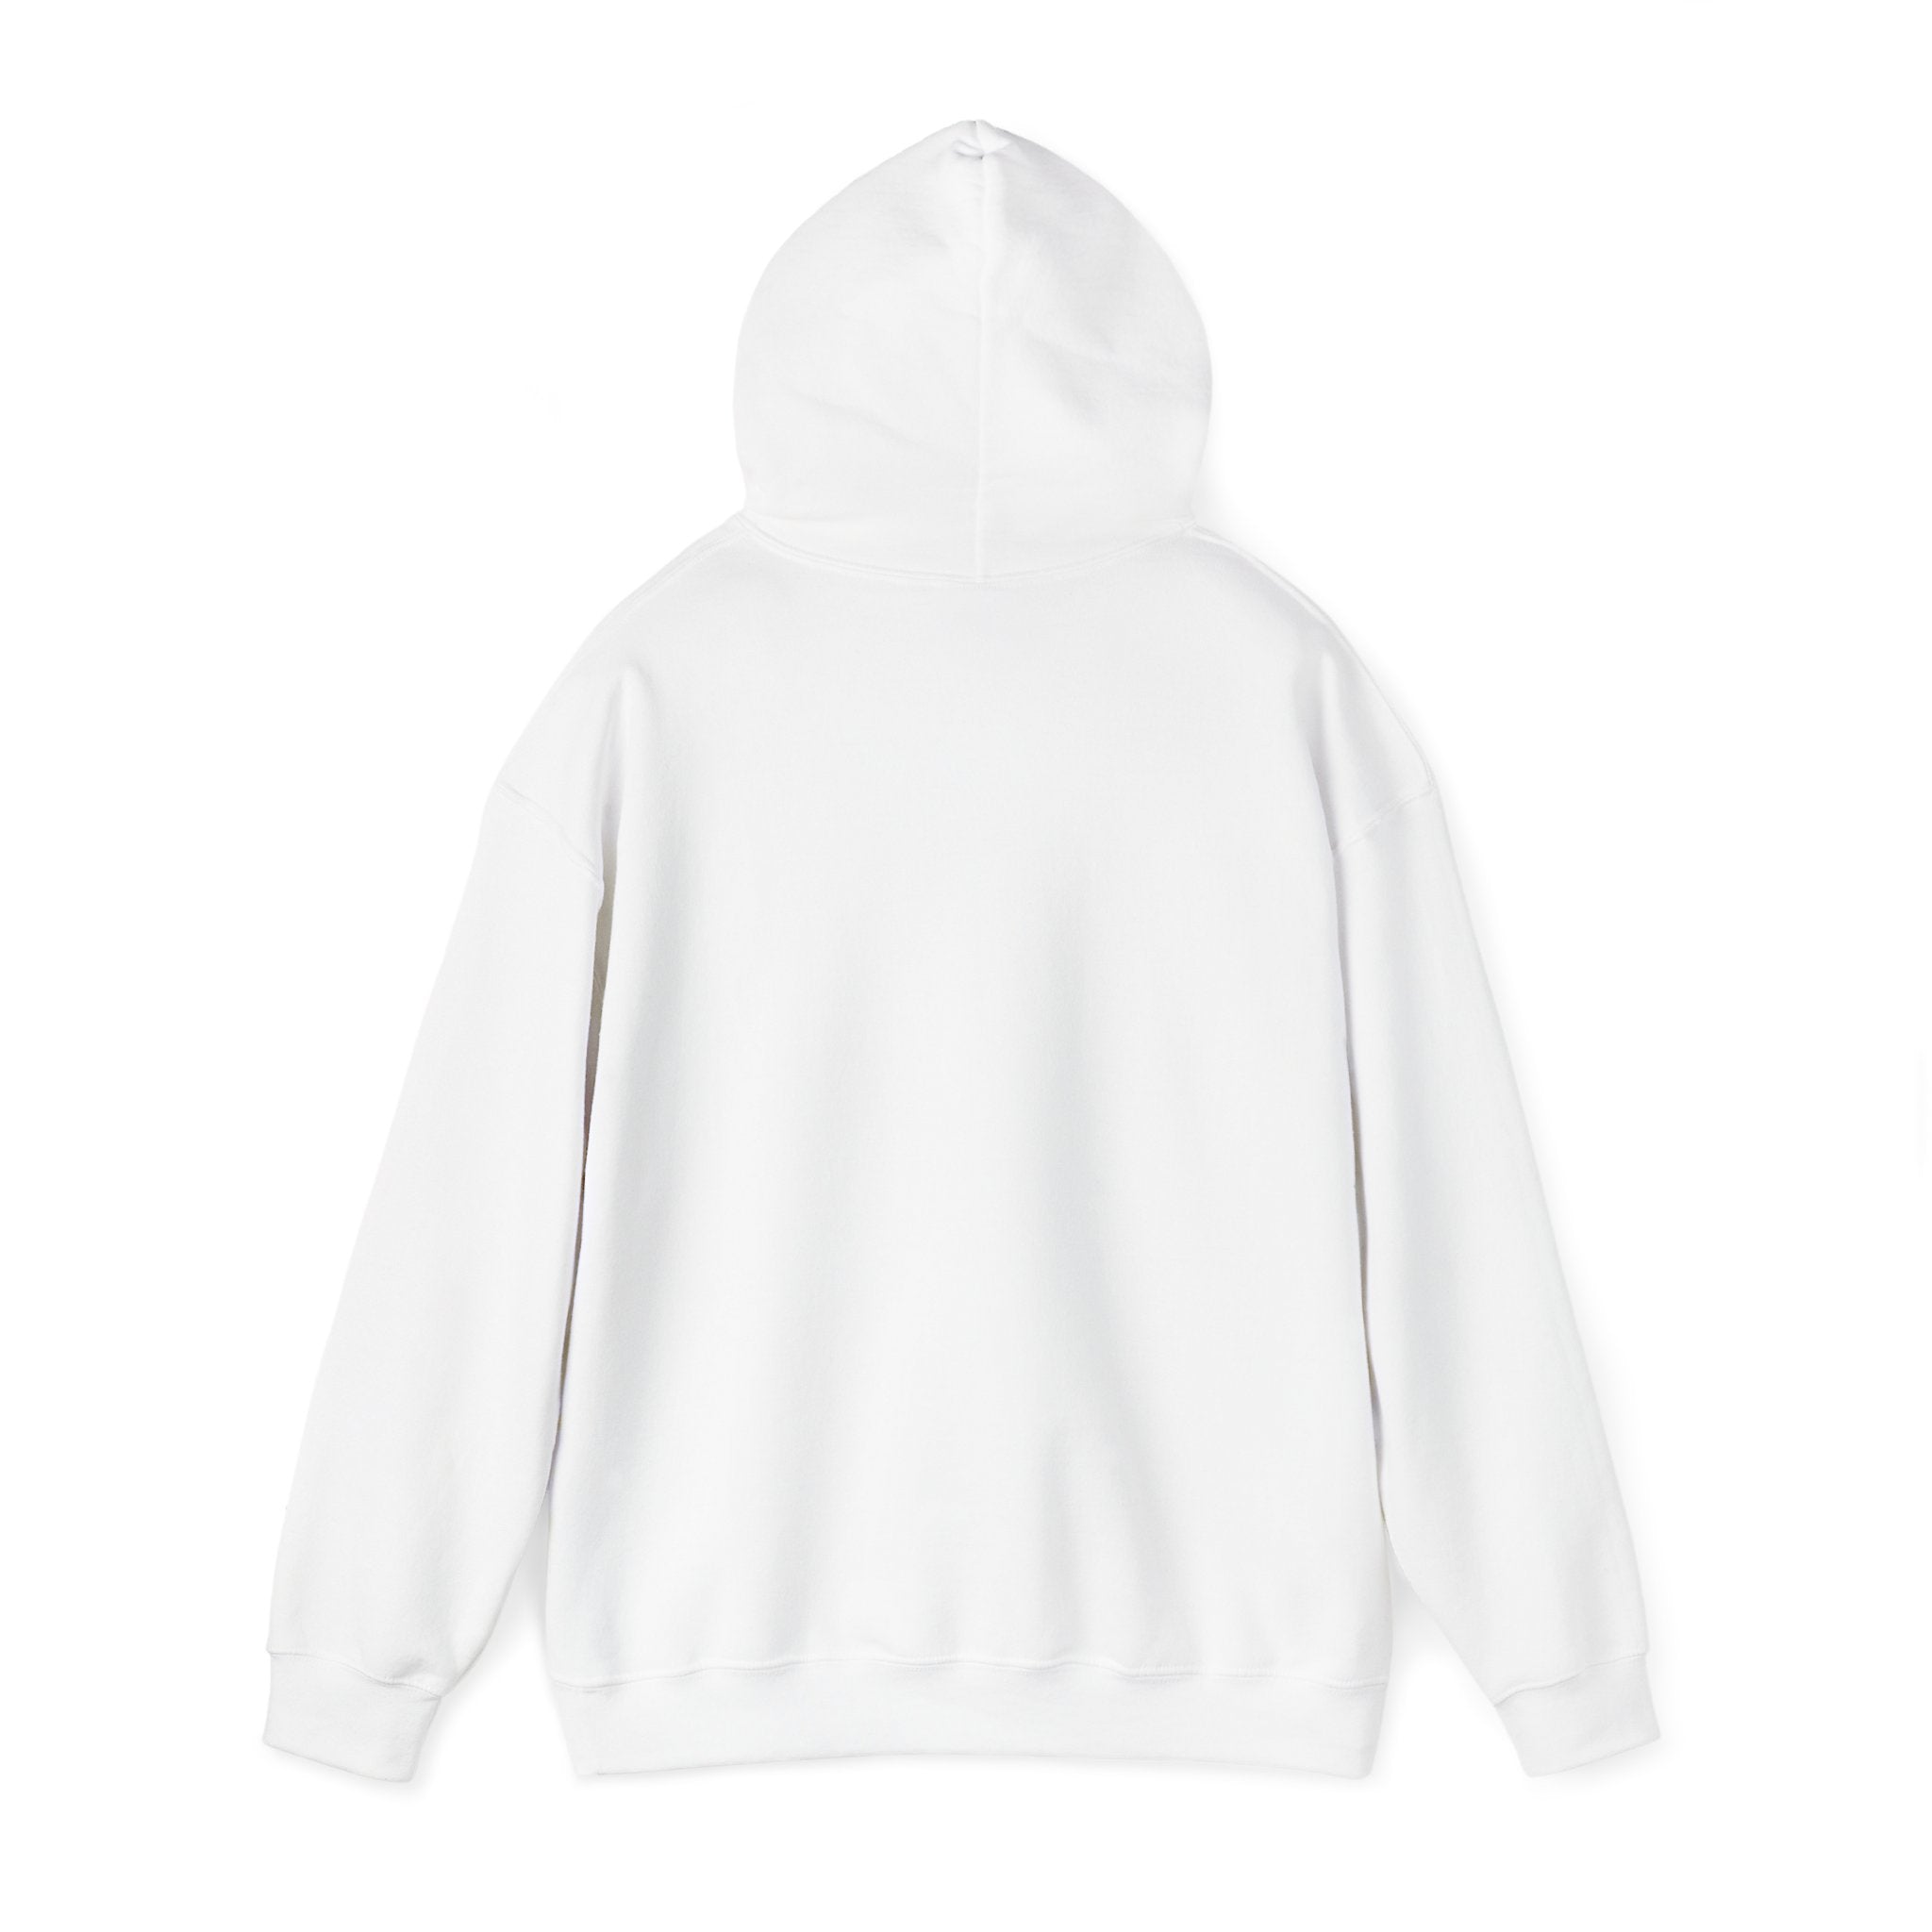 Back view of a stylish plain white Si-S Light Pendant - Hooded Sweatshirt with long sleeves and a relaxed fit.